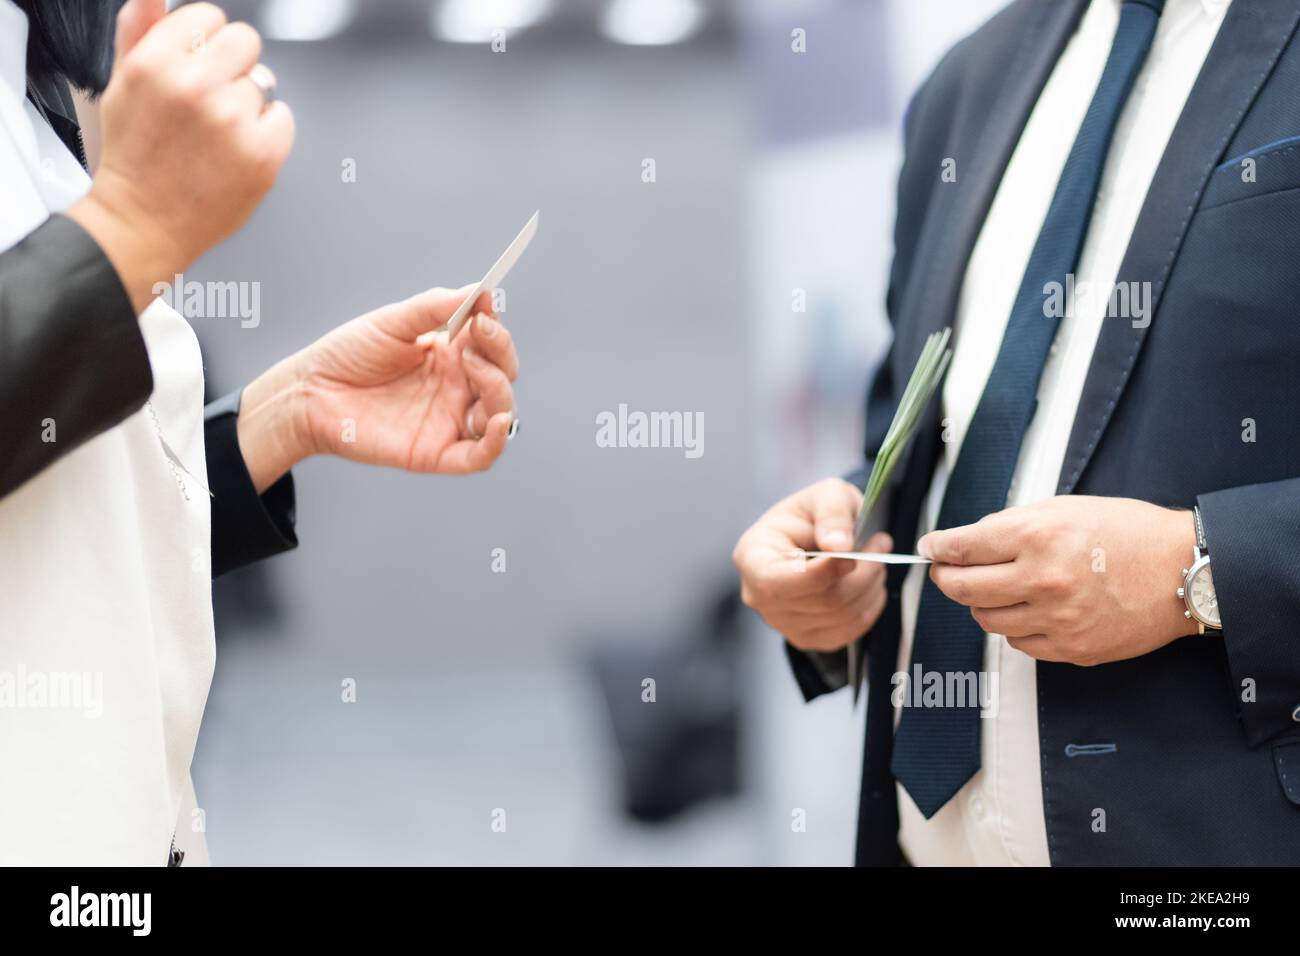 Business people exchanging business card on business meeting, Business discussion talking deal concept. Stock Photo